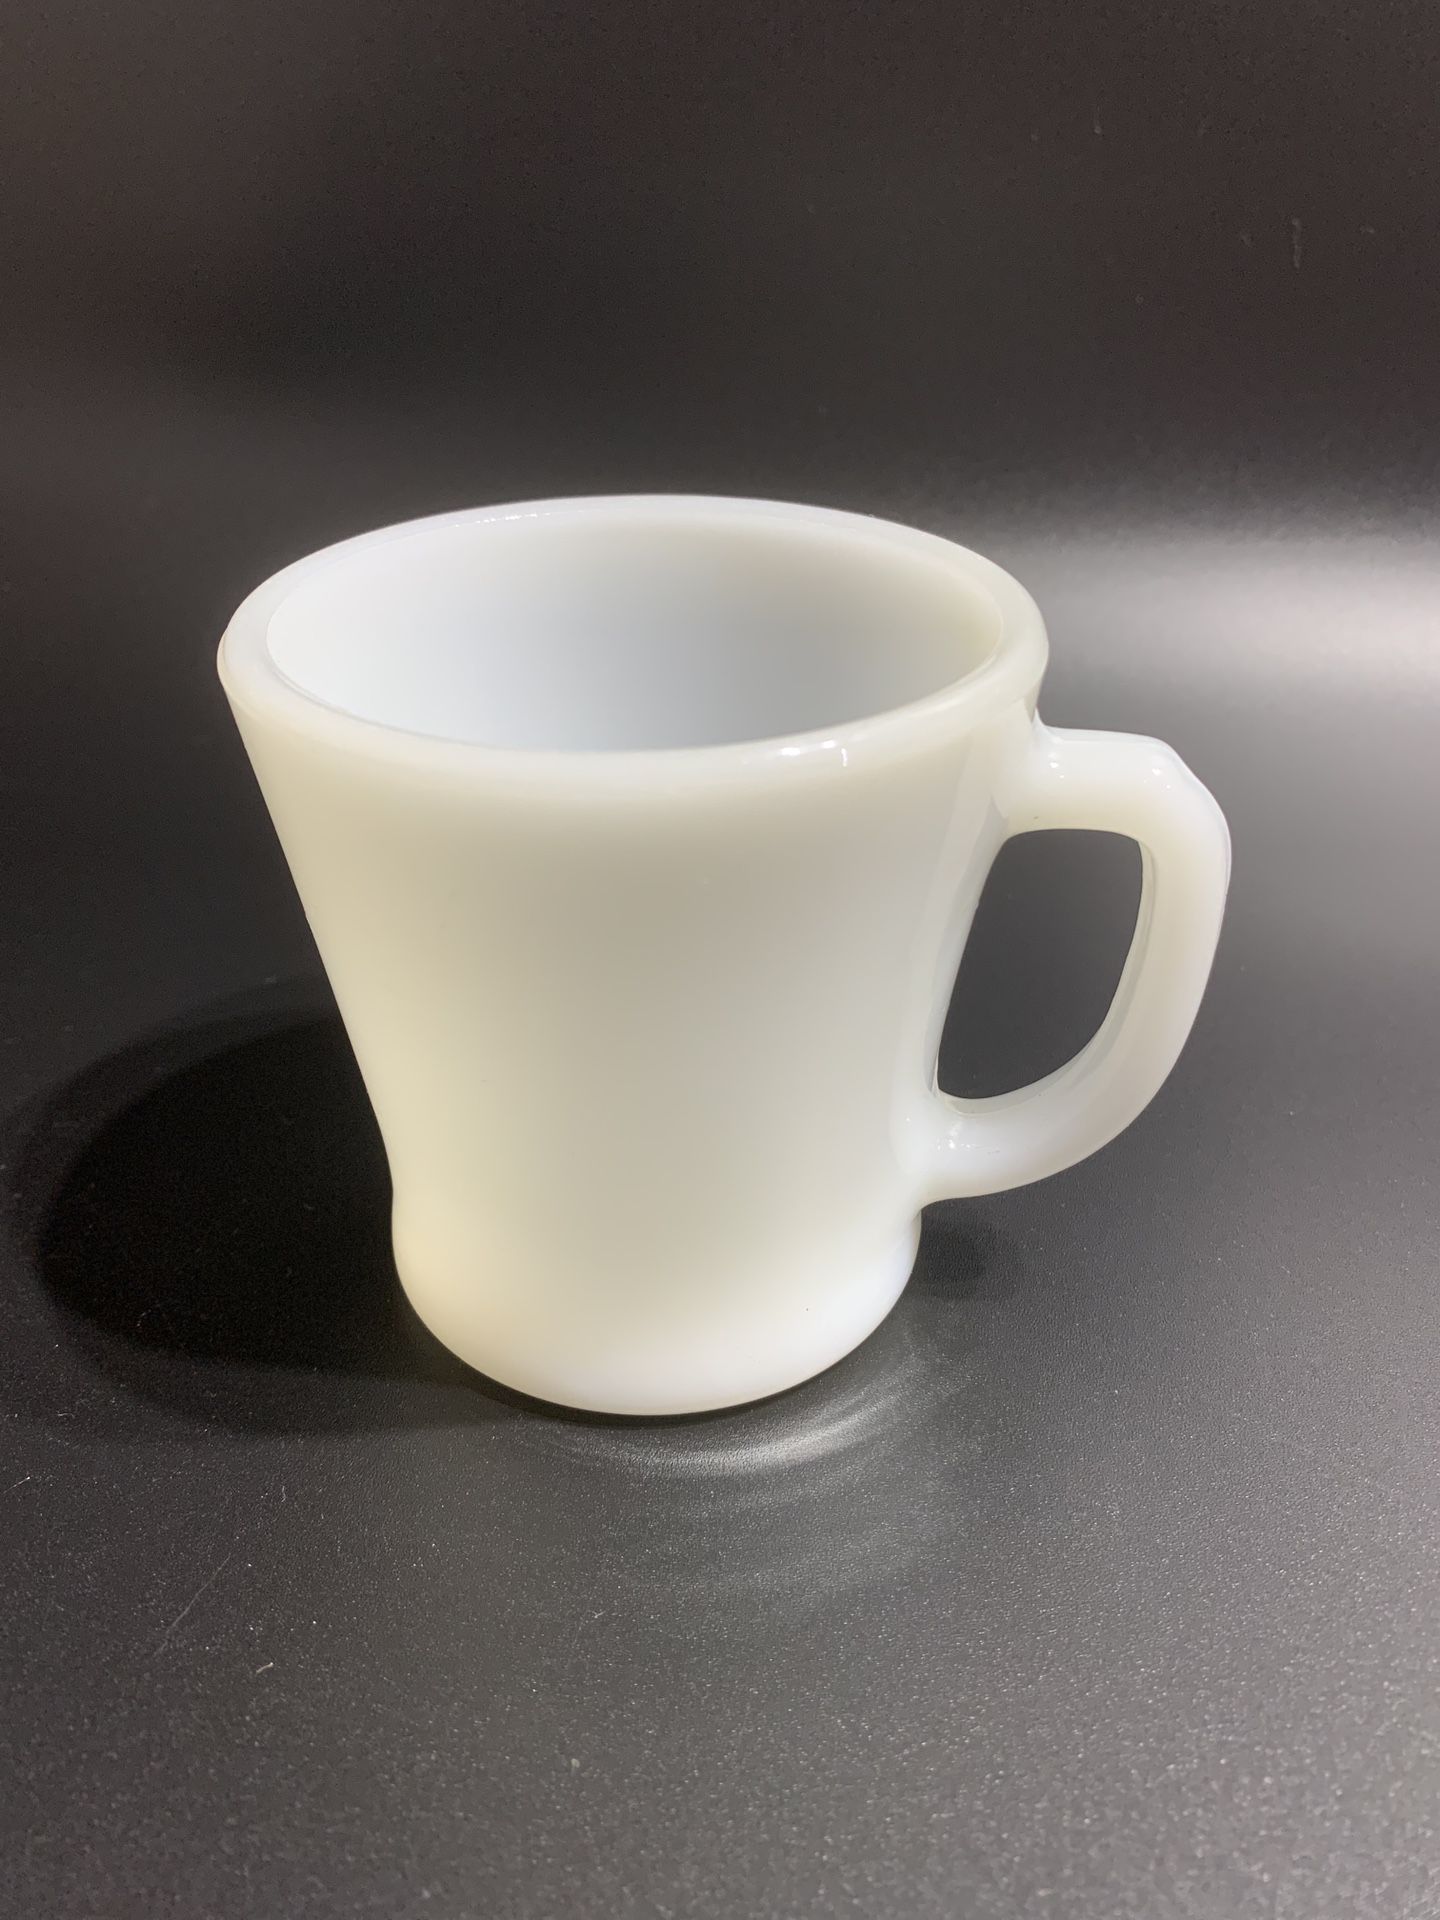 Vintage Anchor Hocking White Milk Glass D Handle Coffee Mug Retro Cup Oven Proof